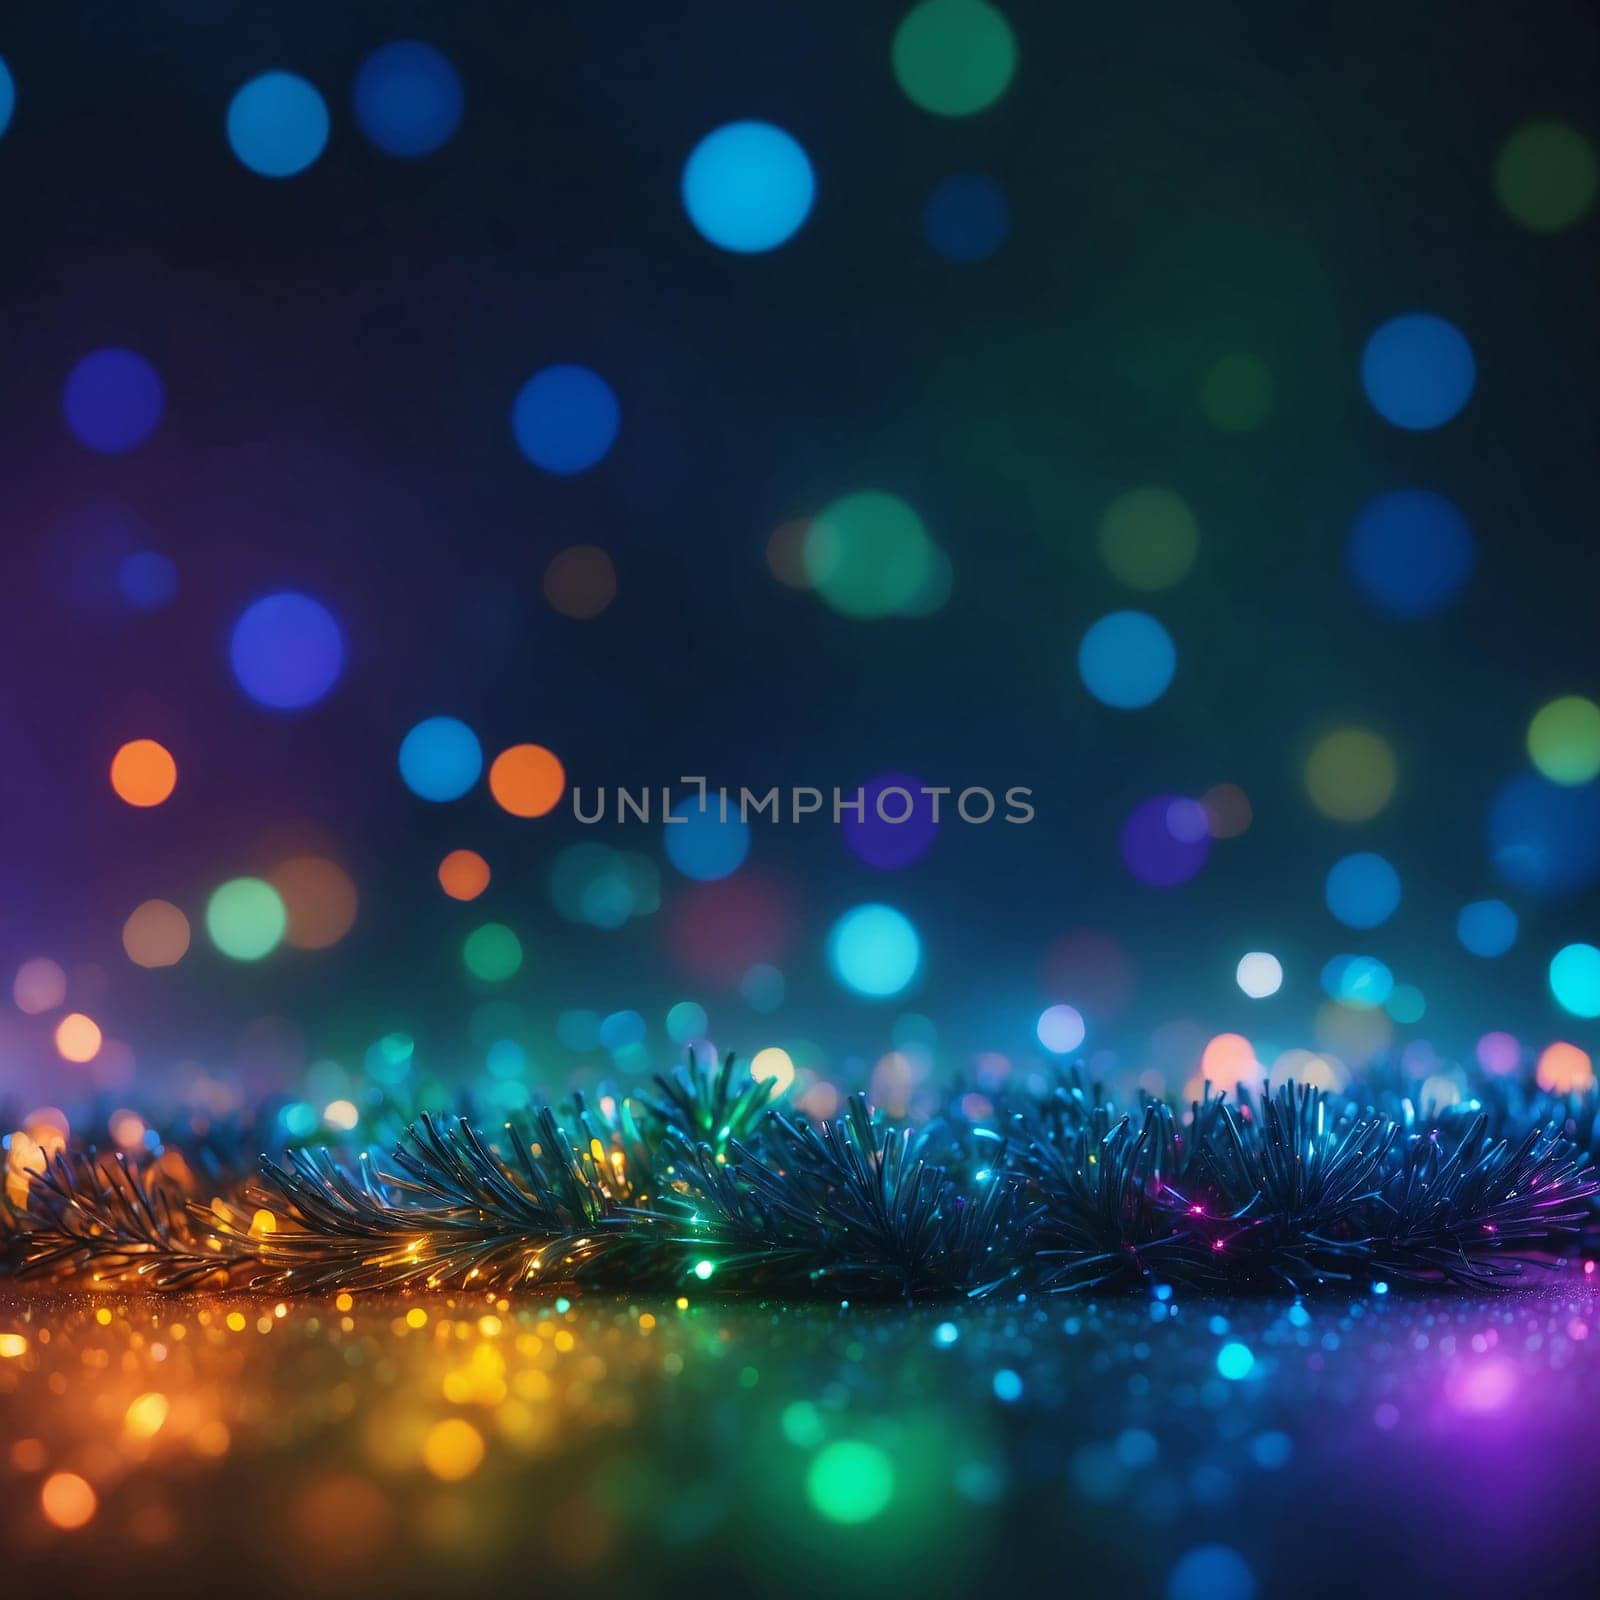 unfocused abstract background with multicolored bokeh lights by Севостьянов